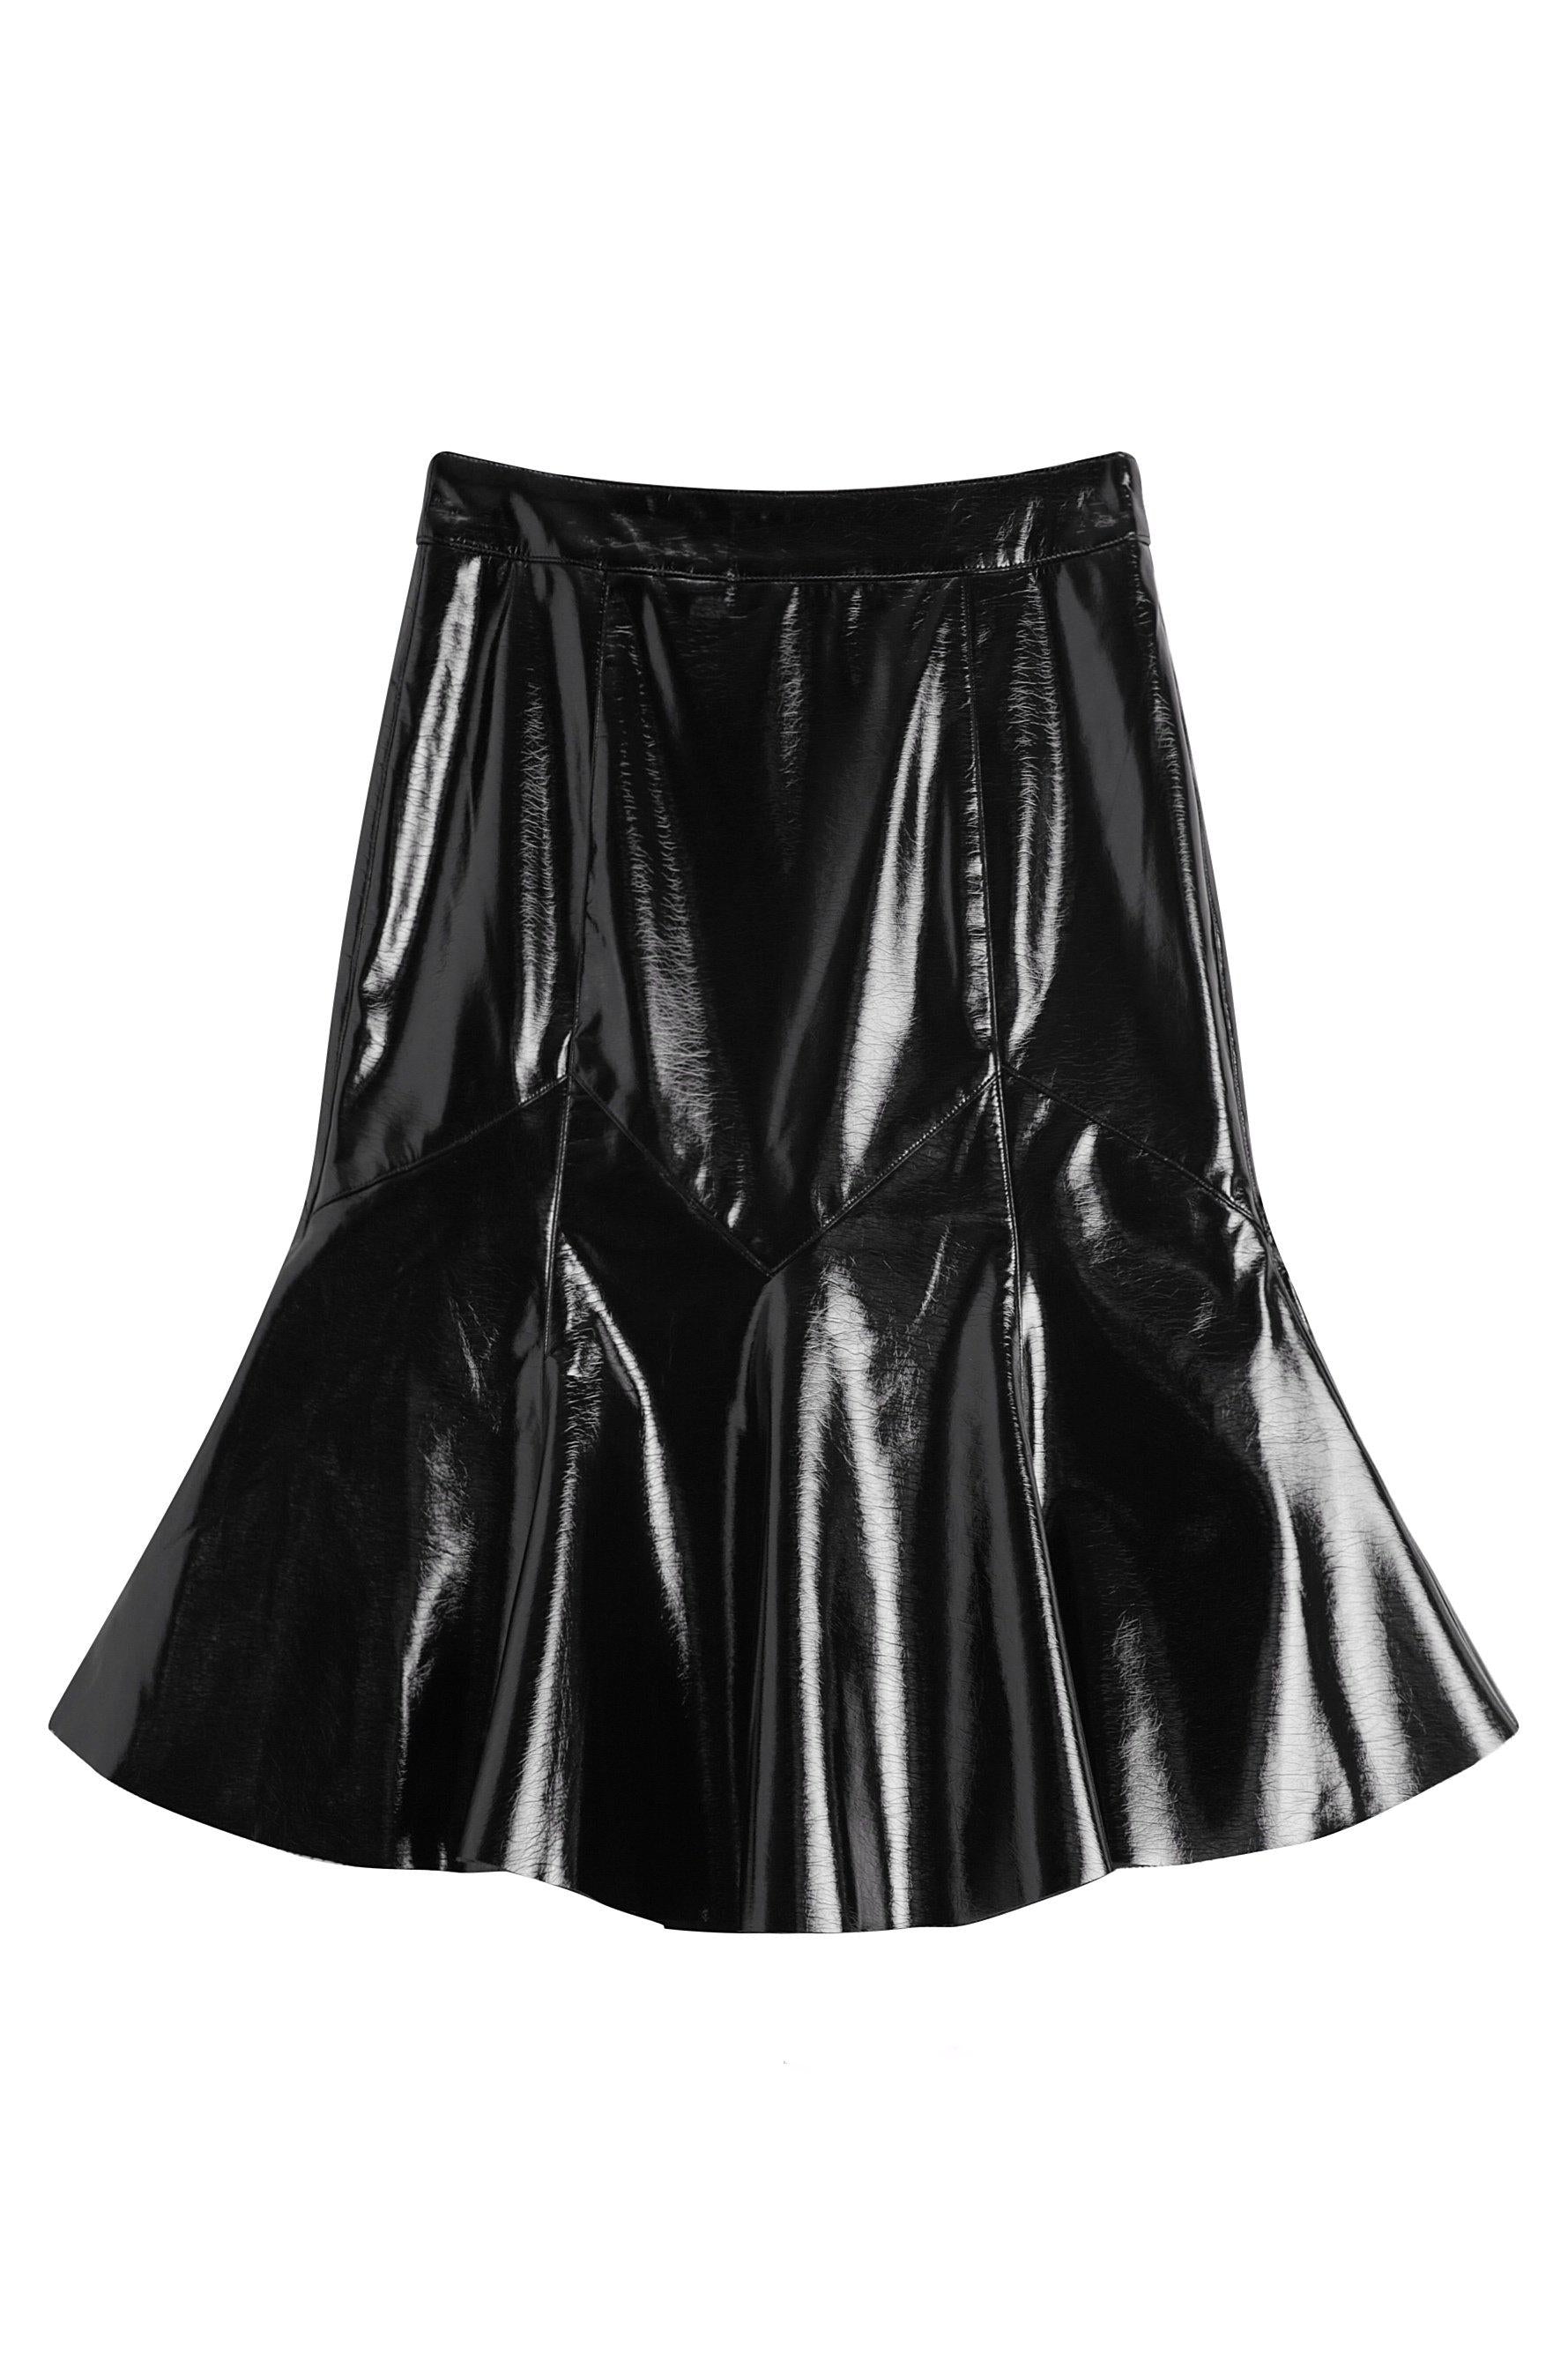 FAME PATENT FAUX LEATHER MIDI SKIRT-SKIRTS-My Dearest